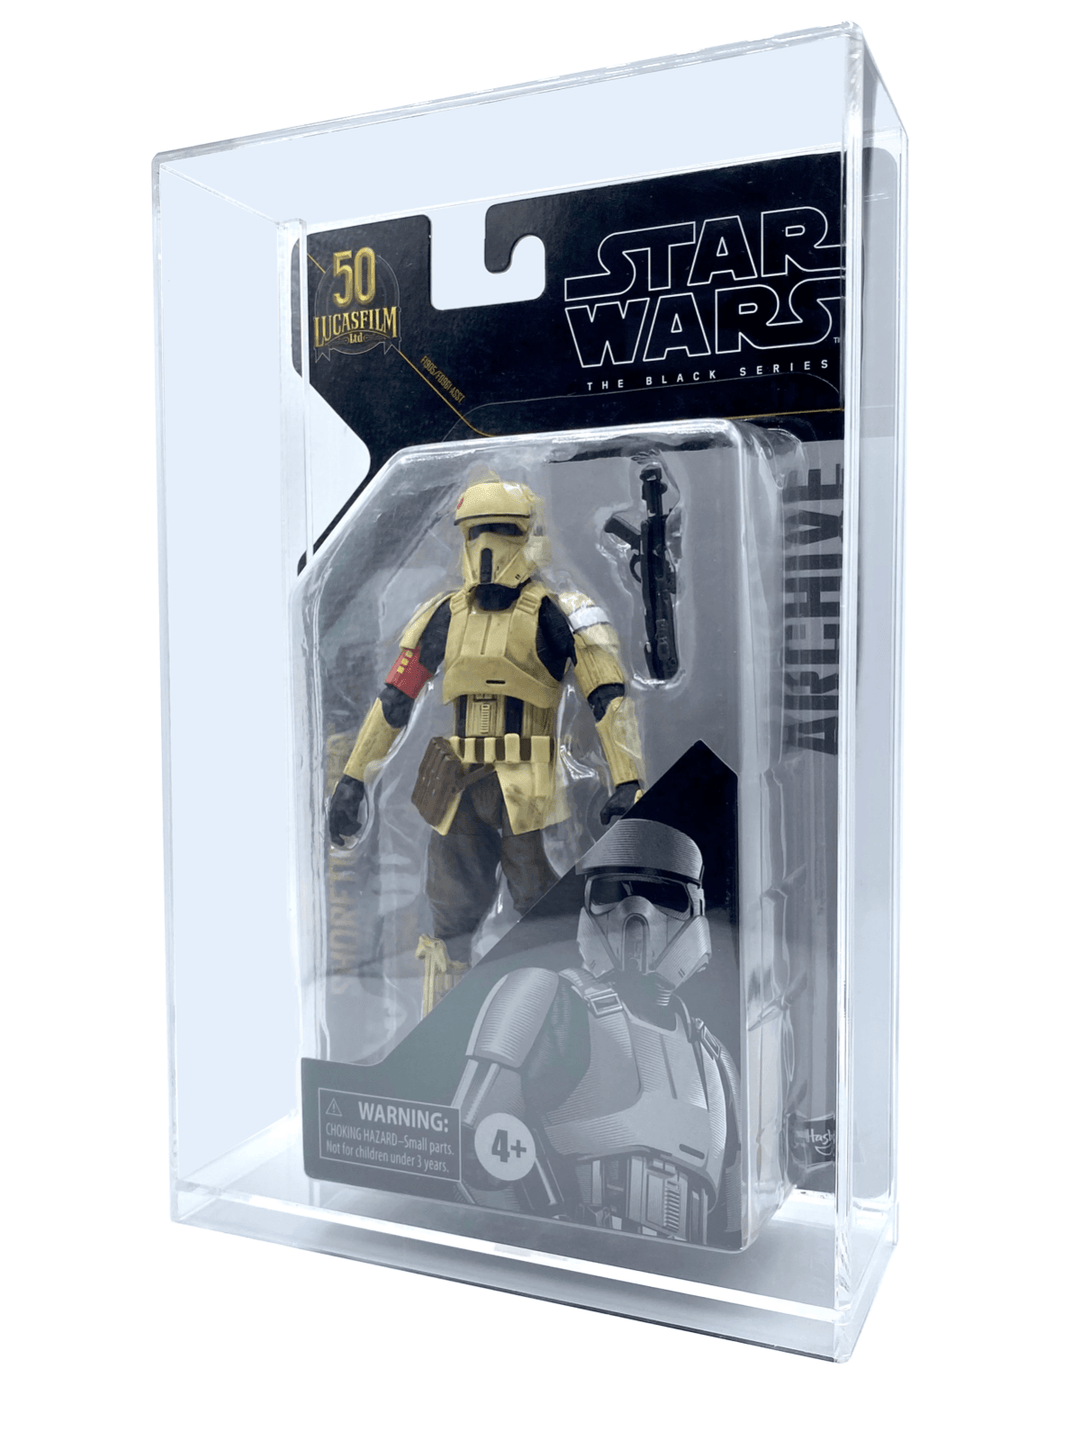 Acrylic Display Case for Action Figures - Caseforceco